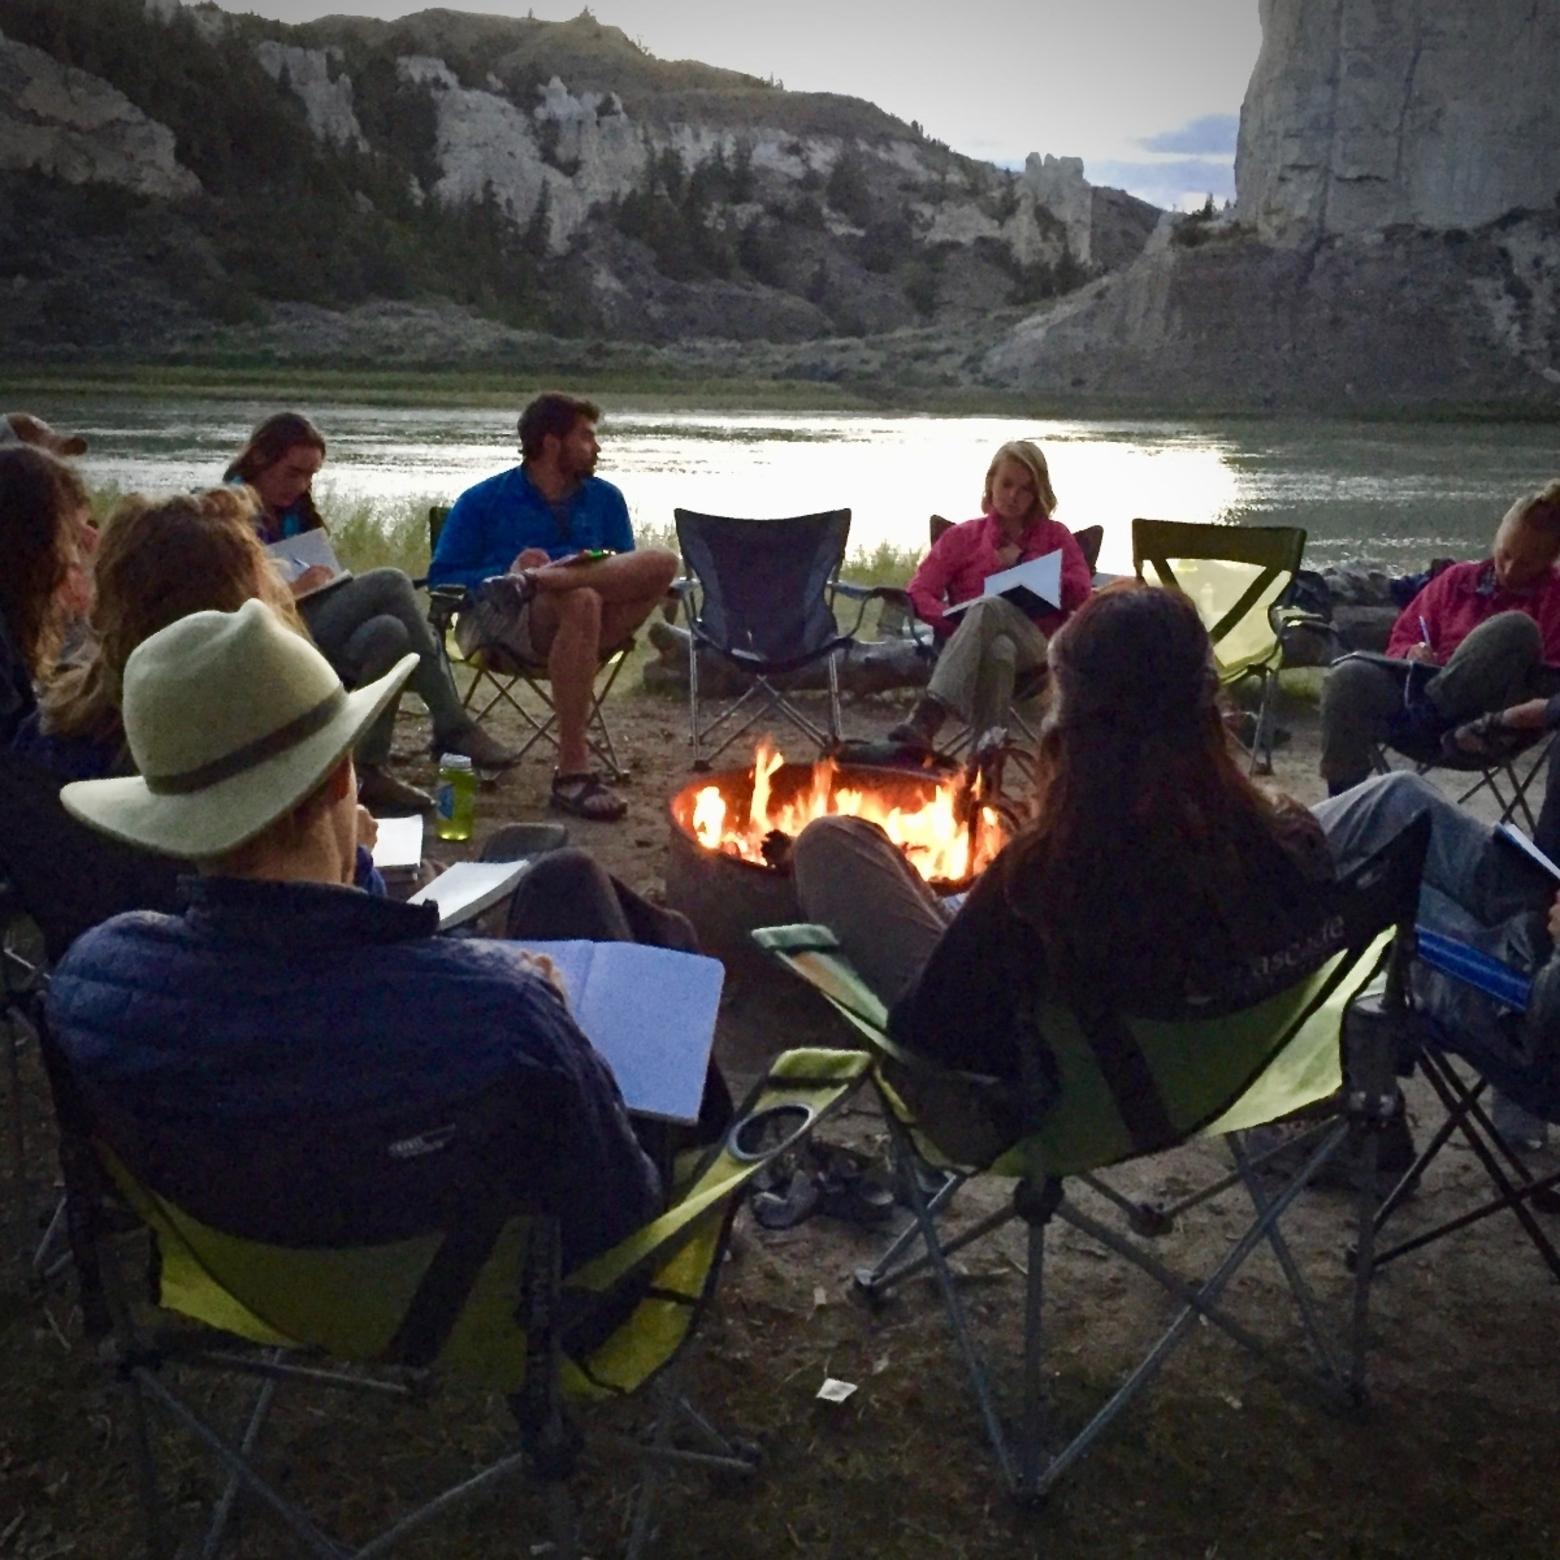 Whitman College's "Semester in the West" students, also known as "Westies," gather to discuss events of the day. Every evening, students come together in a circle and share observations.  They are camped along the Upper Missouri River in Montana discussing the indigenous West, Lewis &amp; Clark, and the Upper Missouri River Breaks National Monument.  Semester in the West, which involves students ground-truthing myth, legend, culture and politics, is led by Snow's colleague, Phil Brick, but together, at the campus in Walla Walla, Washington, they and colleagues have tried to build a place-based curriculum. Photo by Todd Wilkinson